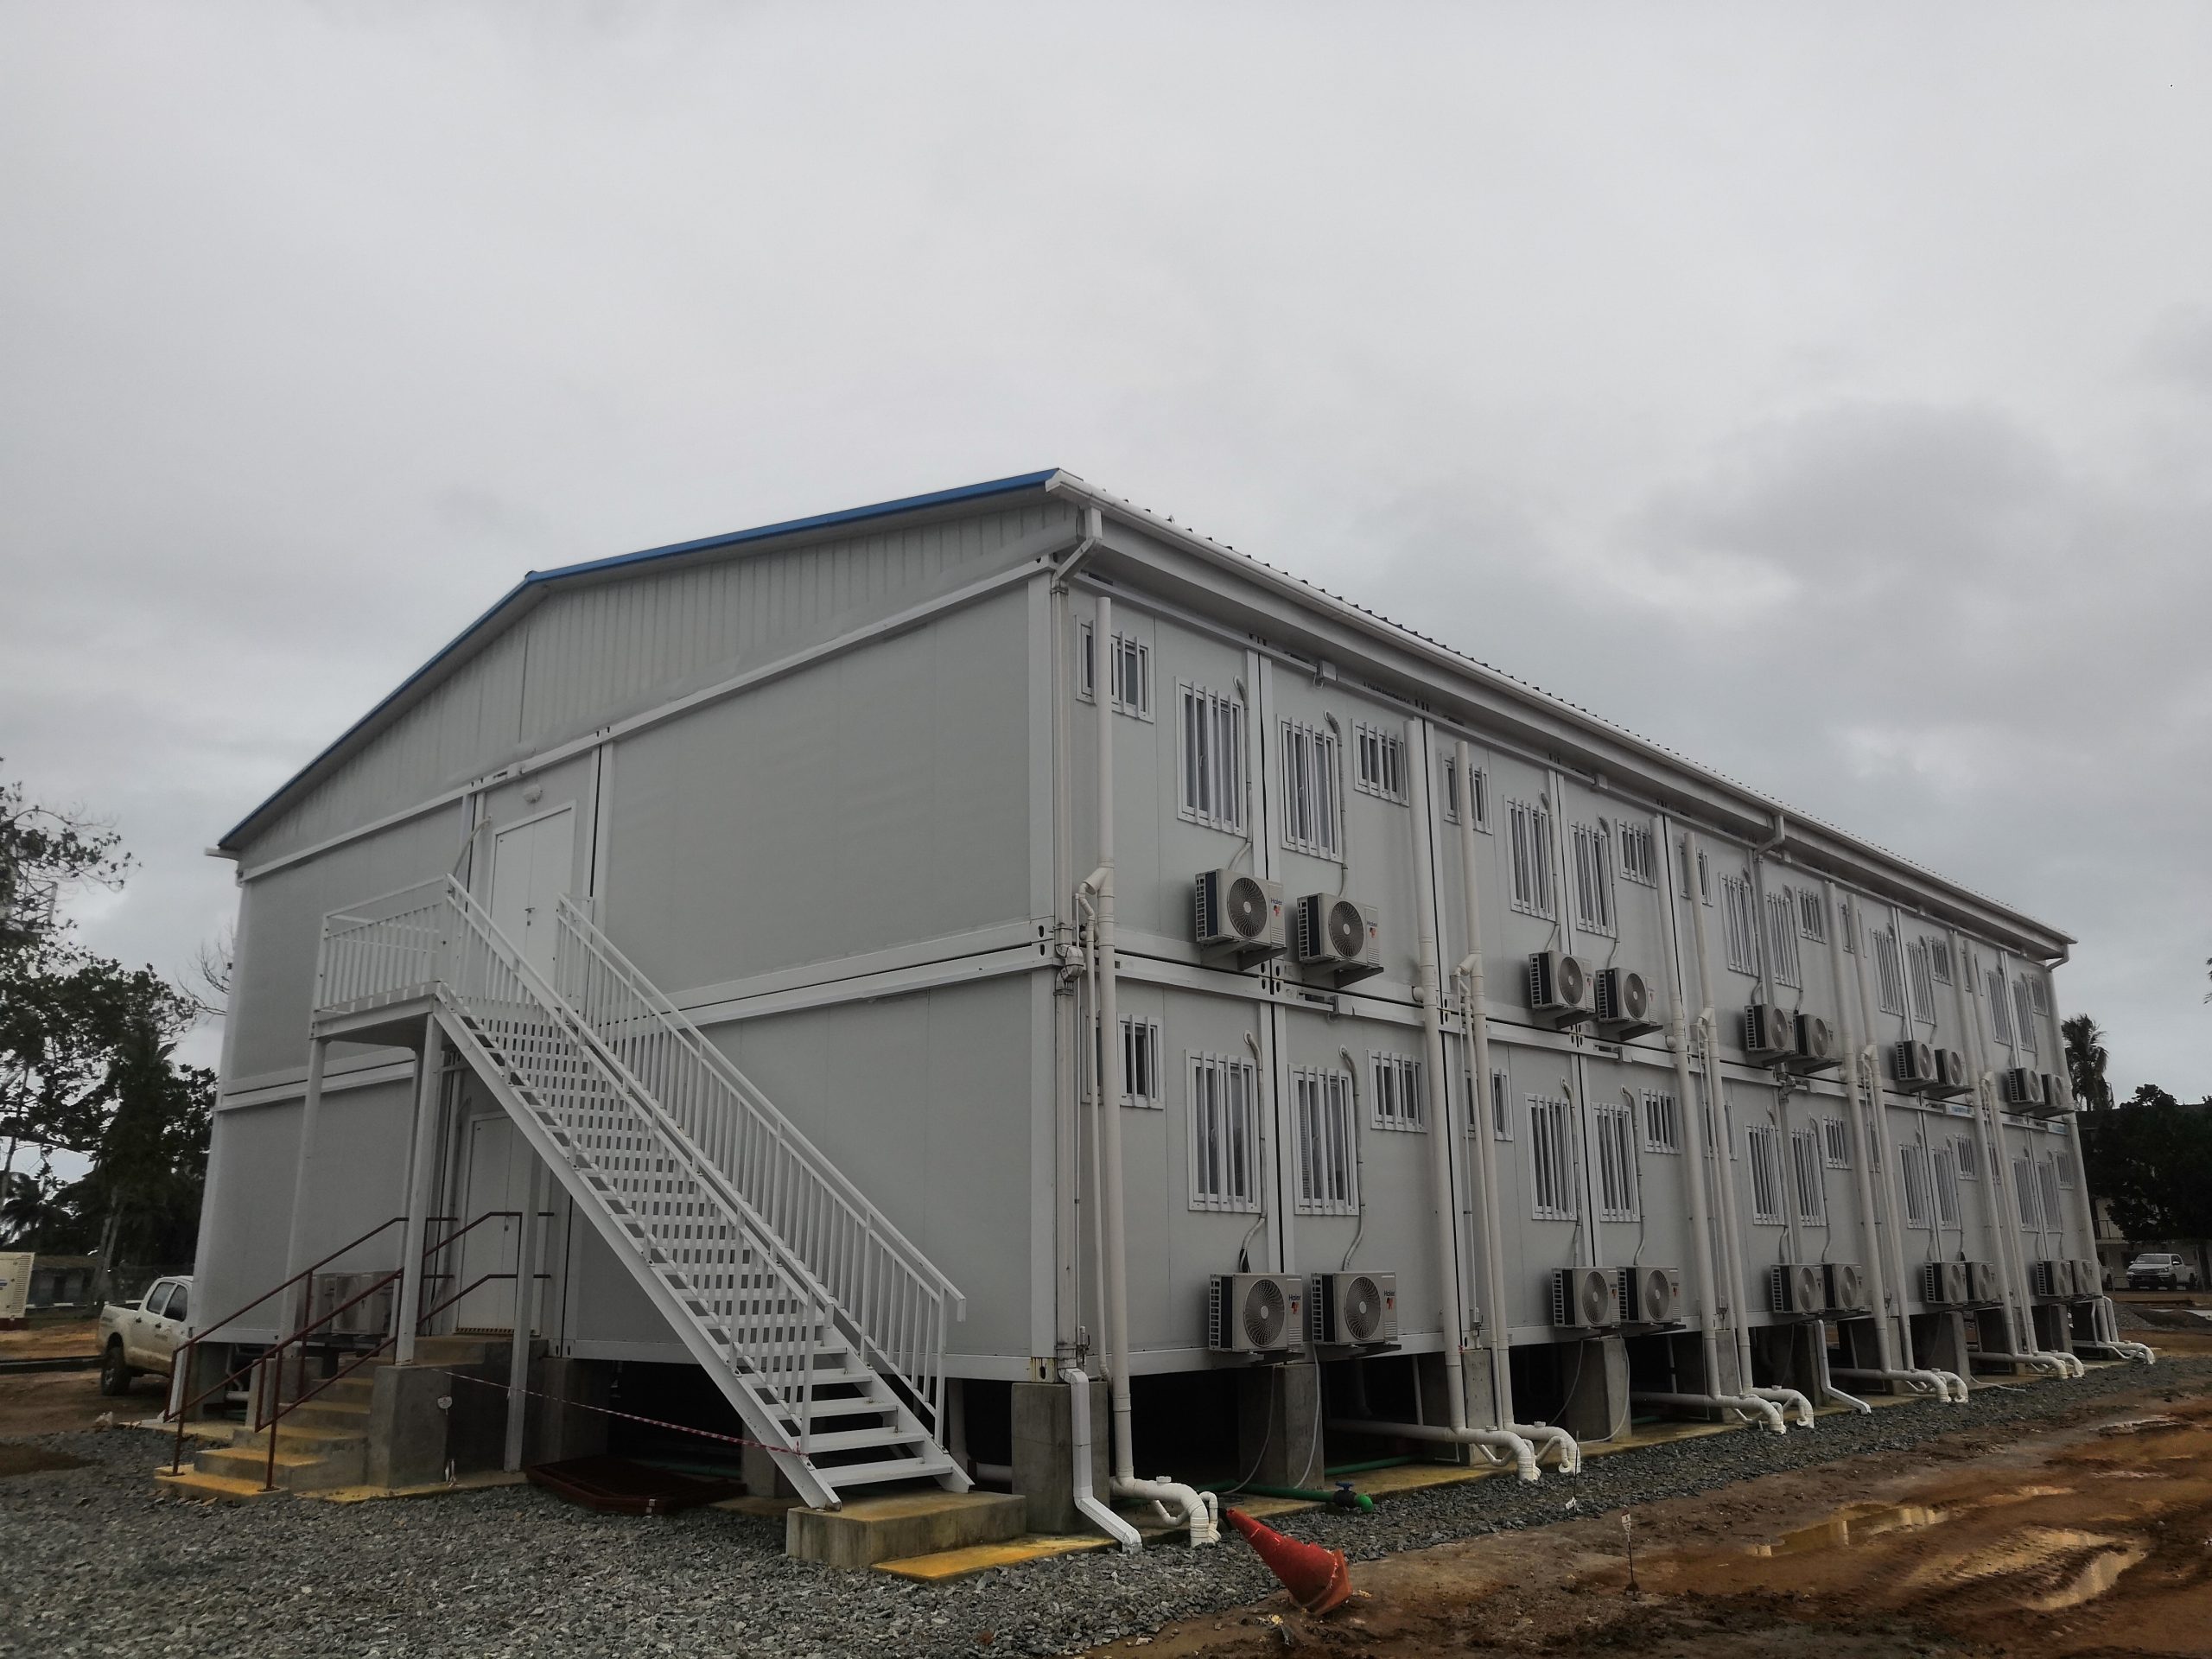 Researchers analyze utilizing repurposed shipping containers as structural components in Lida Group's prefabricated modular homes to accommodate growing populations outside closed container labor camps